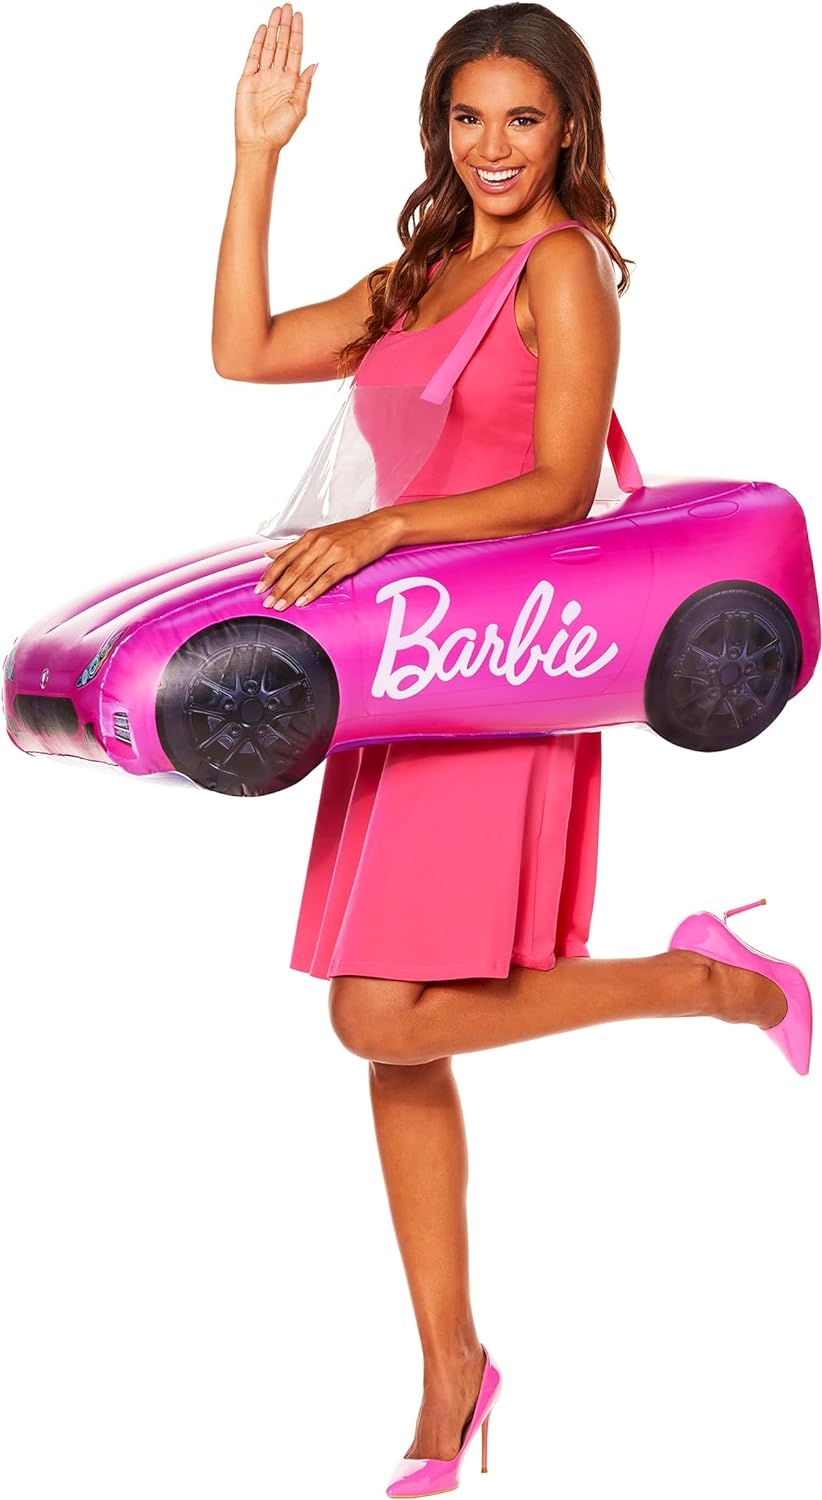 Barbie Costume Ideas: Let's Go Party! [Costume Guide